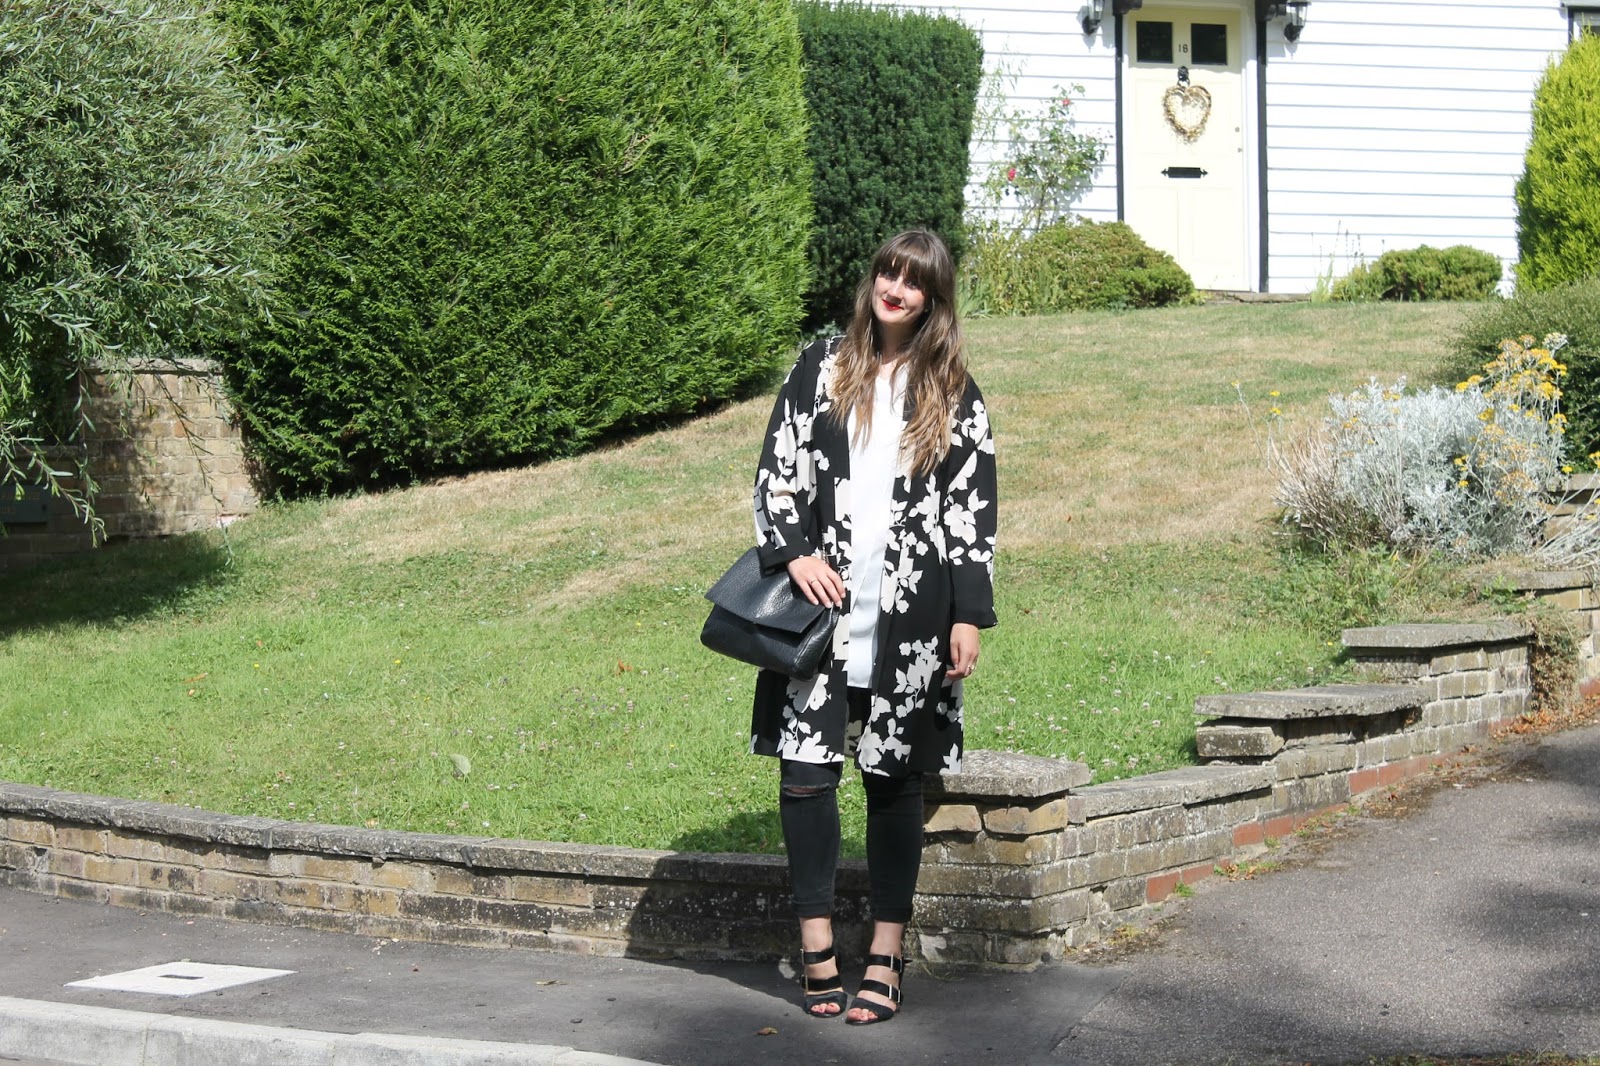 OOTD: Floral duster coat | The story of a girl who lives above her means